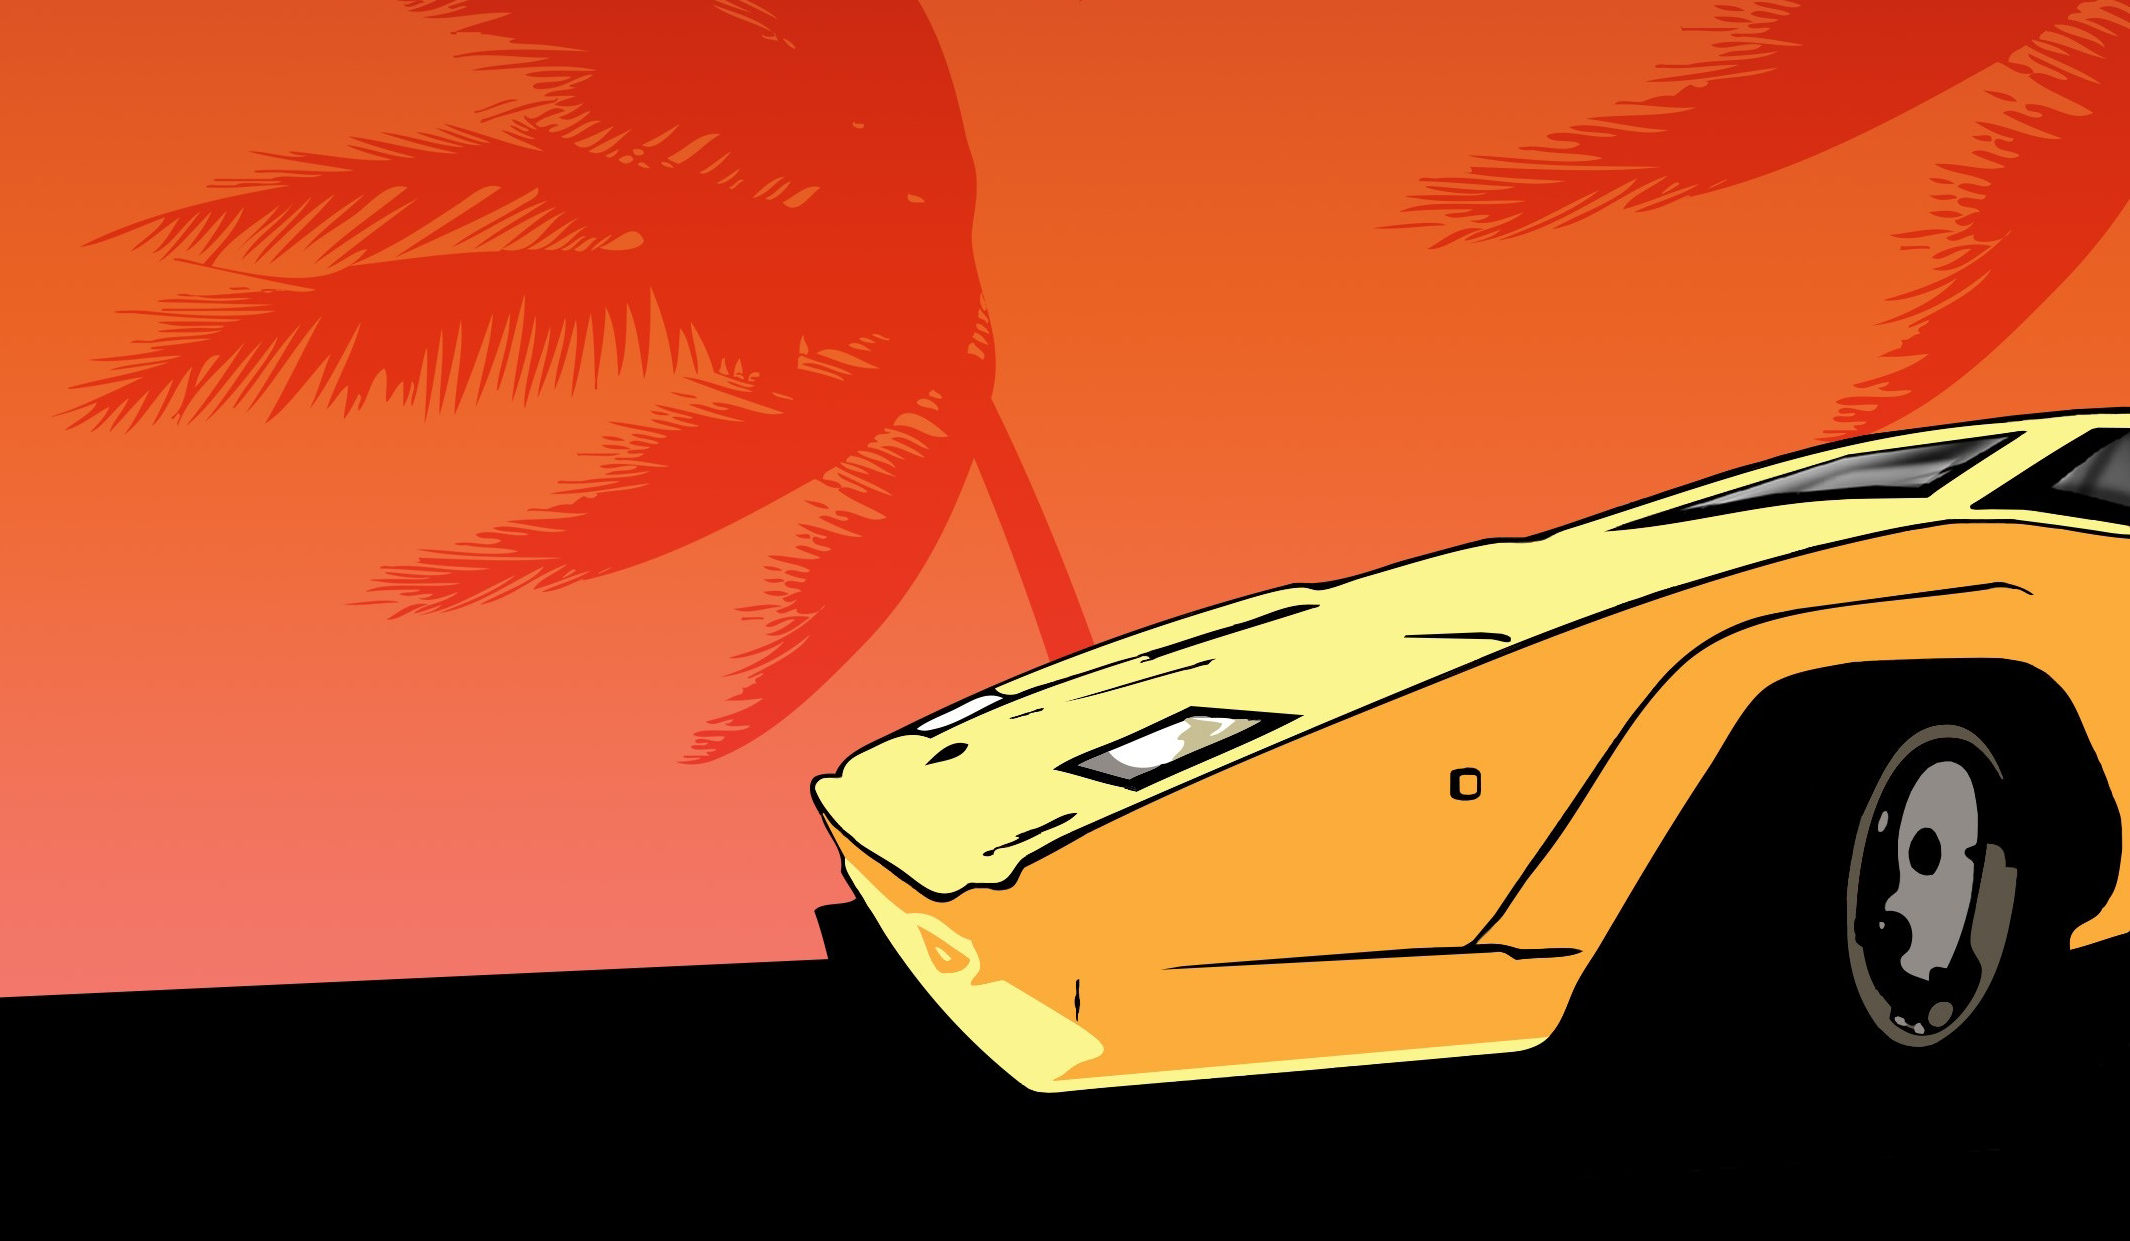 GTA Vice City Created a New Wave of ’80s Nostalgia